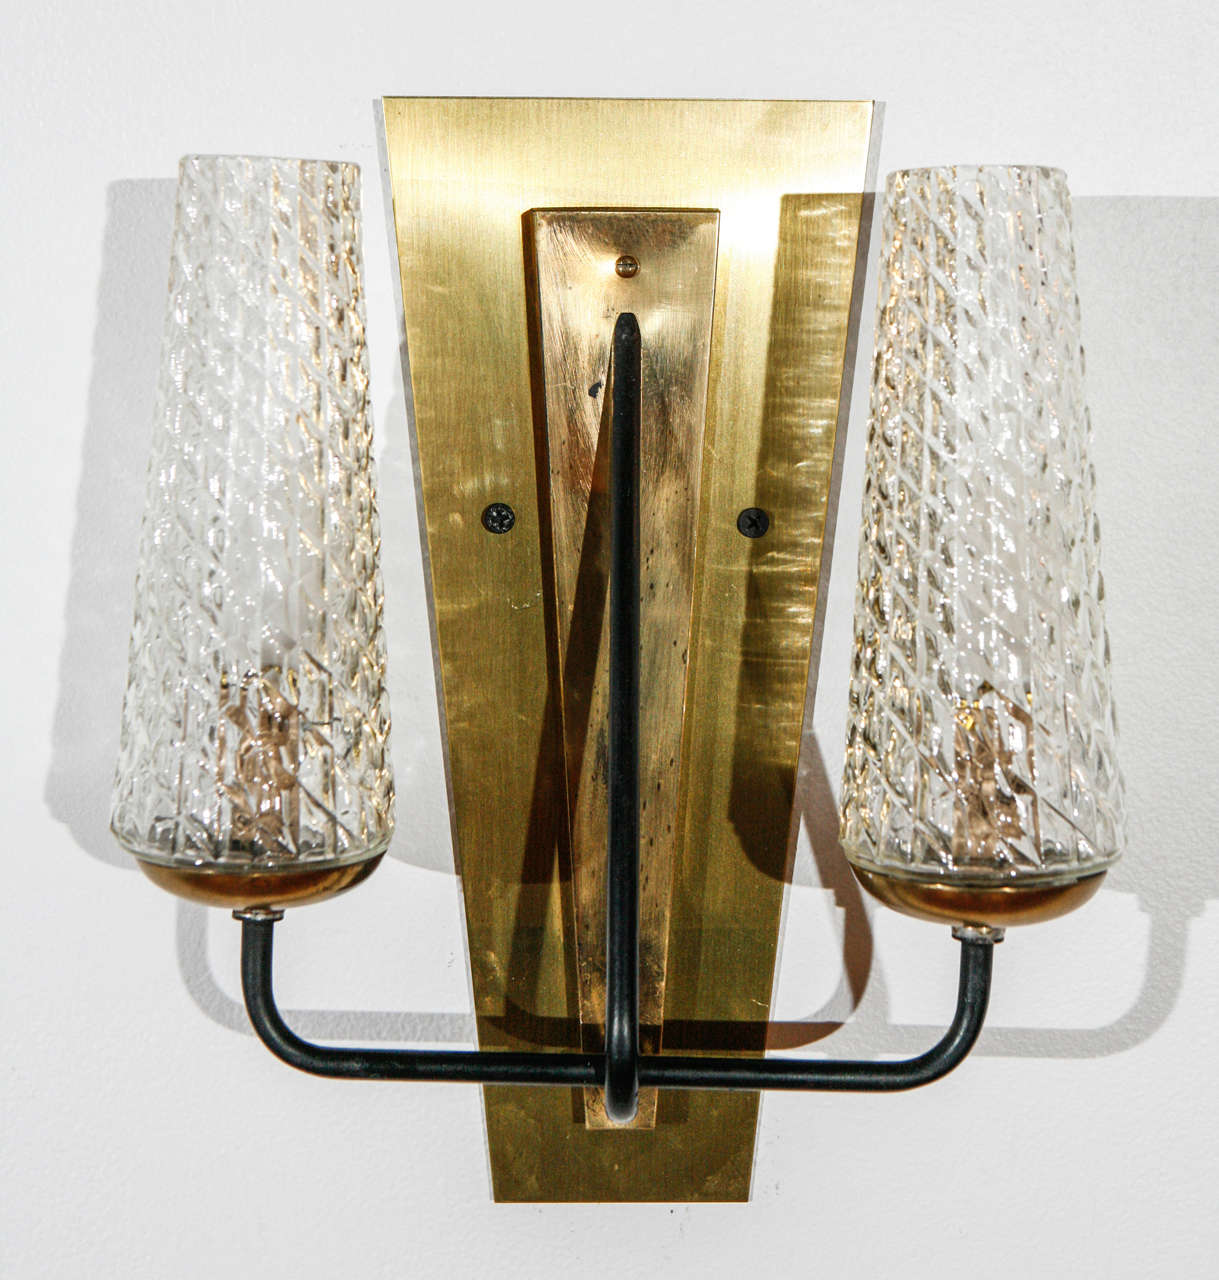 Pair of Italian Mid-Century doubles sconces, each sconce newly rewired for two 60 watt candelabra bulbs.